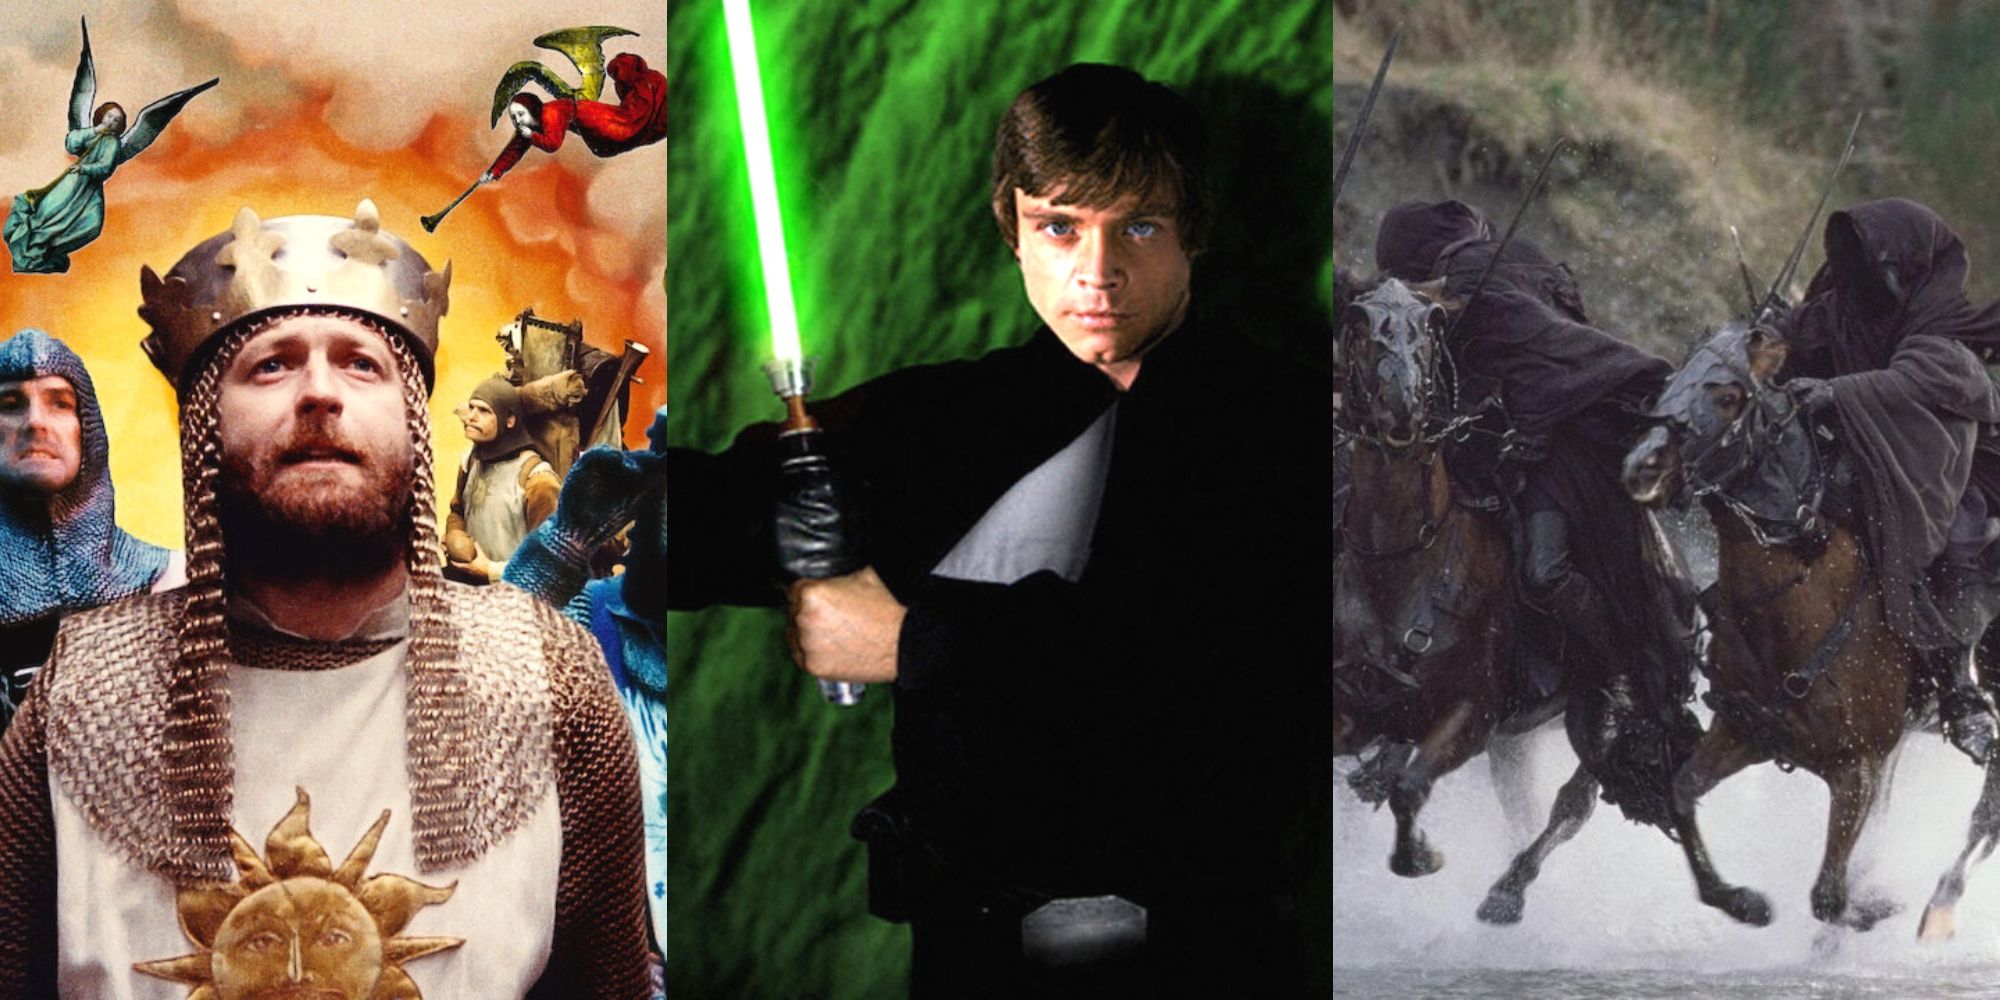 King Arthur and his knights in Monty Python and the Holy Grail, Luke Skywalker in Star Wars, Nazgul in The Lord Of The Rings